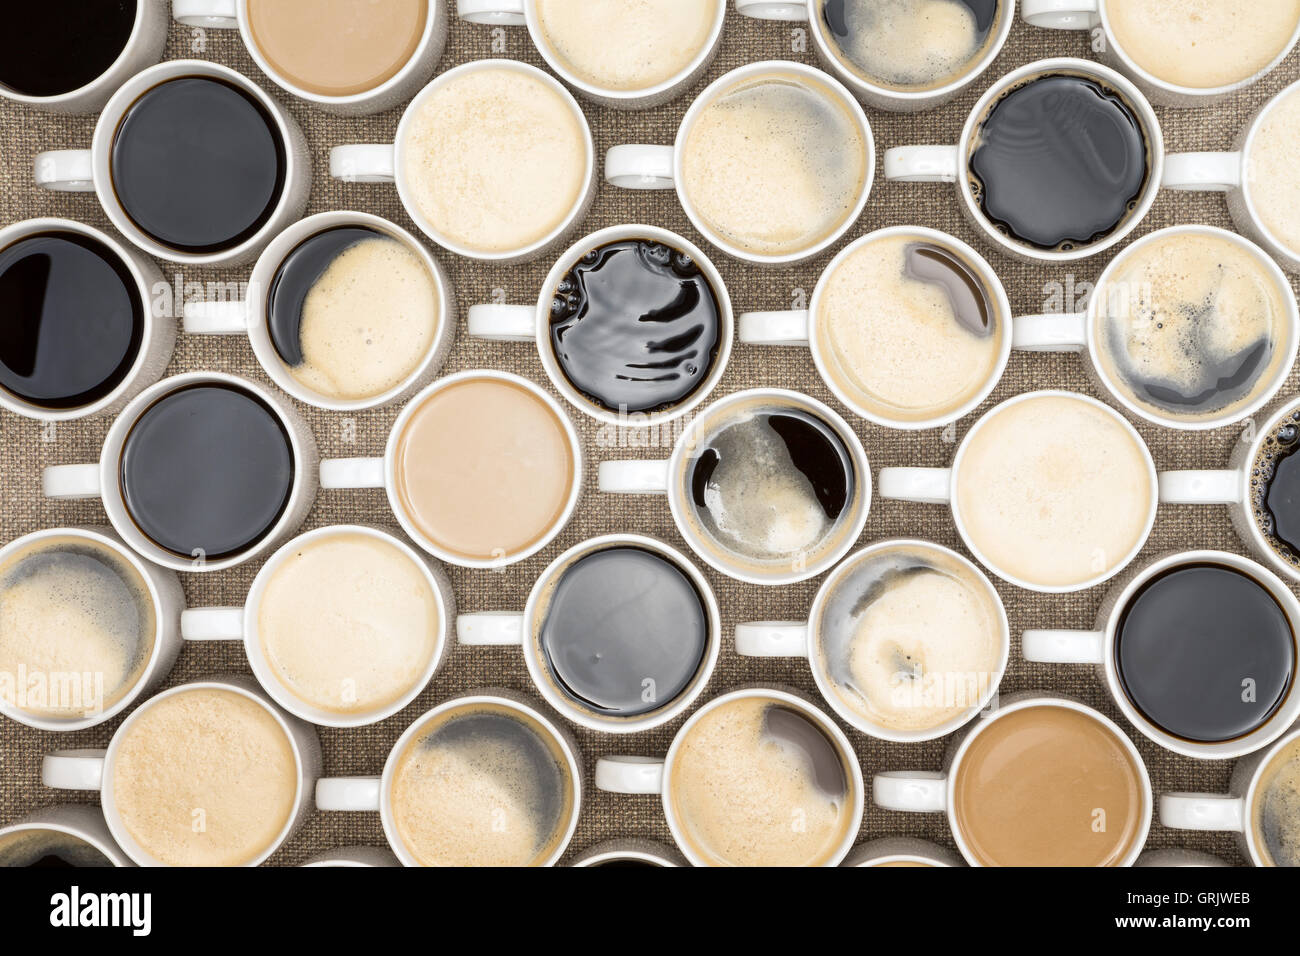 Conceptual image of regimented rows of coffee mugs lined up in straight rows with their handles facing the same direction like c Stock Photo